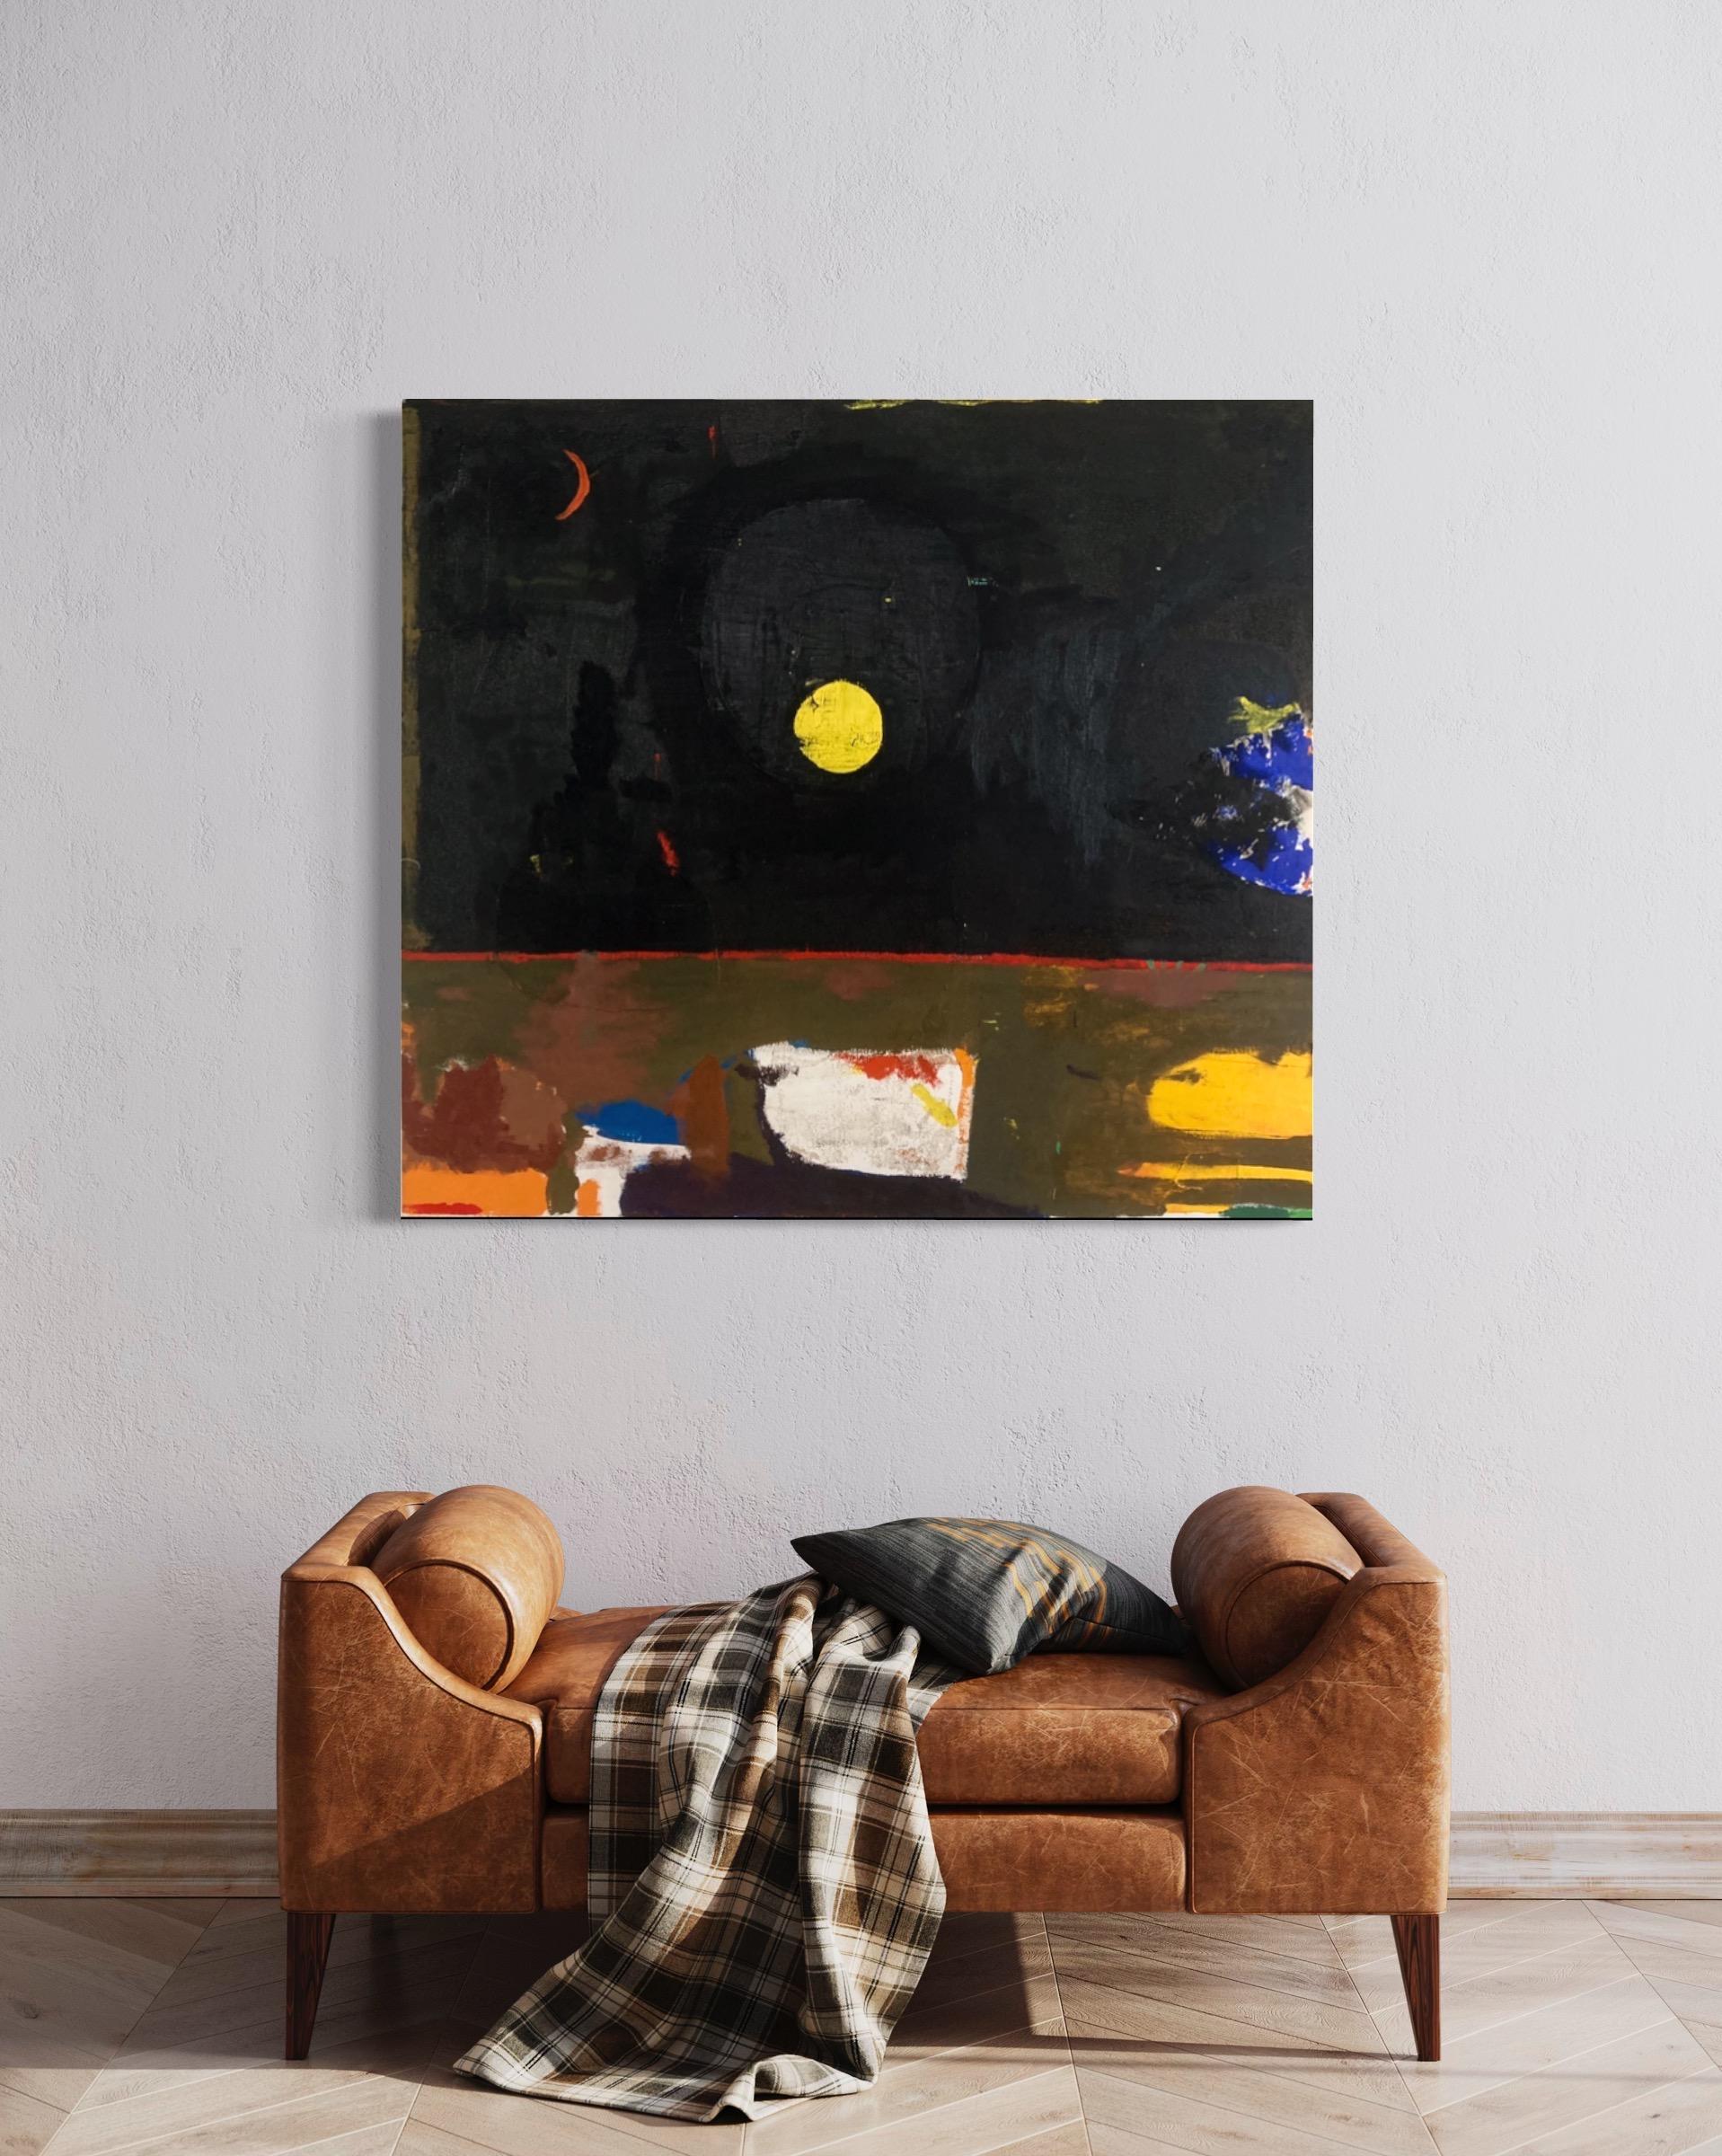 Arid incorporates elements of the landscape, texture and mixed materials to create a desert like scene open to interpretation.  Created in 2022, this painting is part of the ongoing series of landscape paintings that shows a circle, sun or moon as